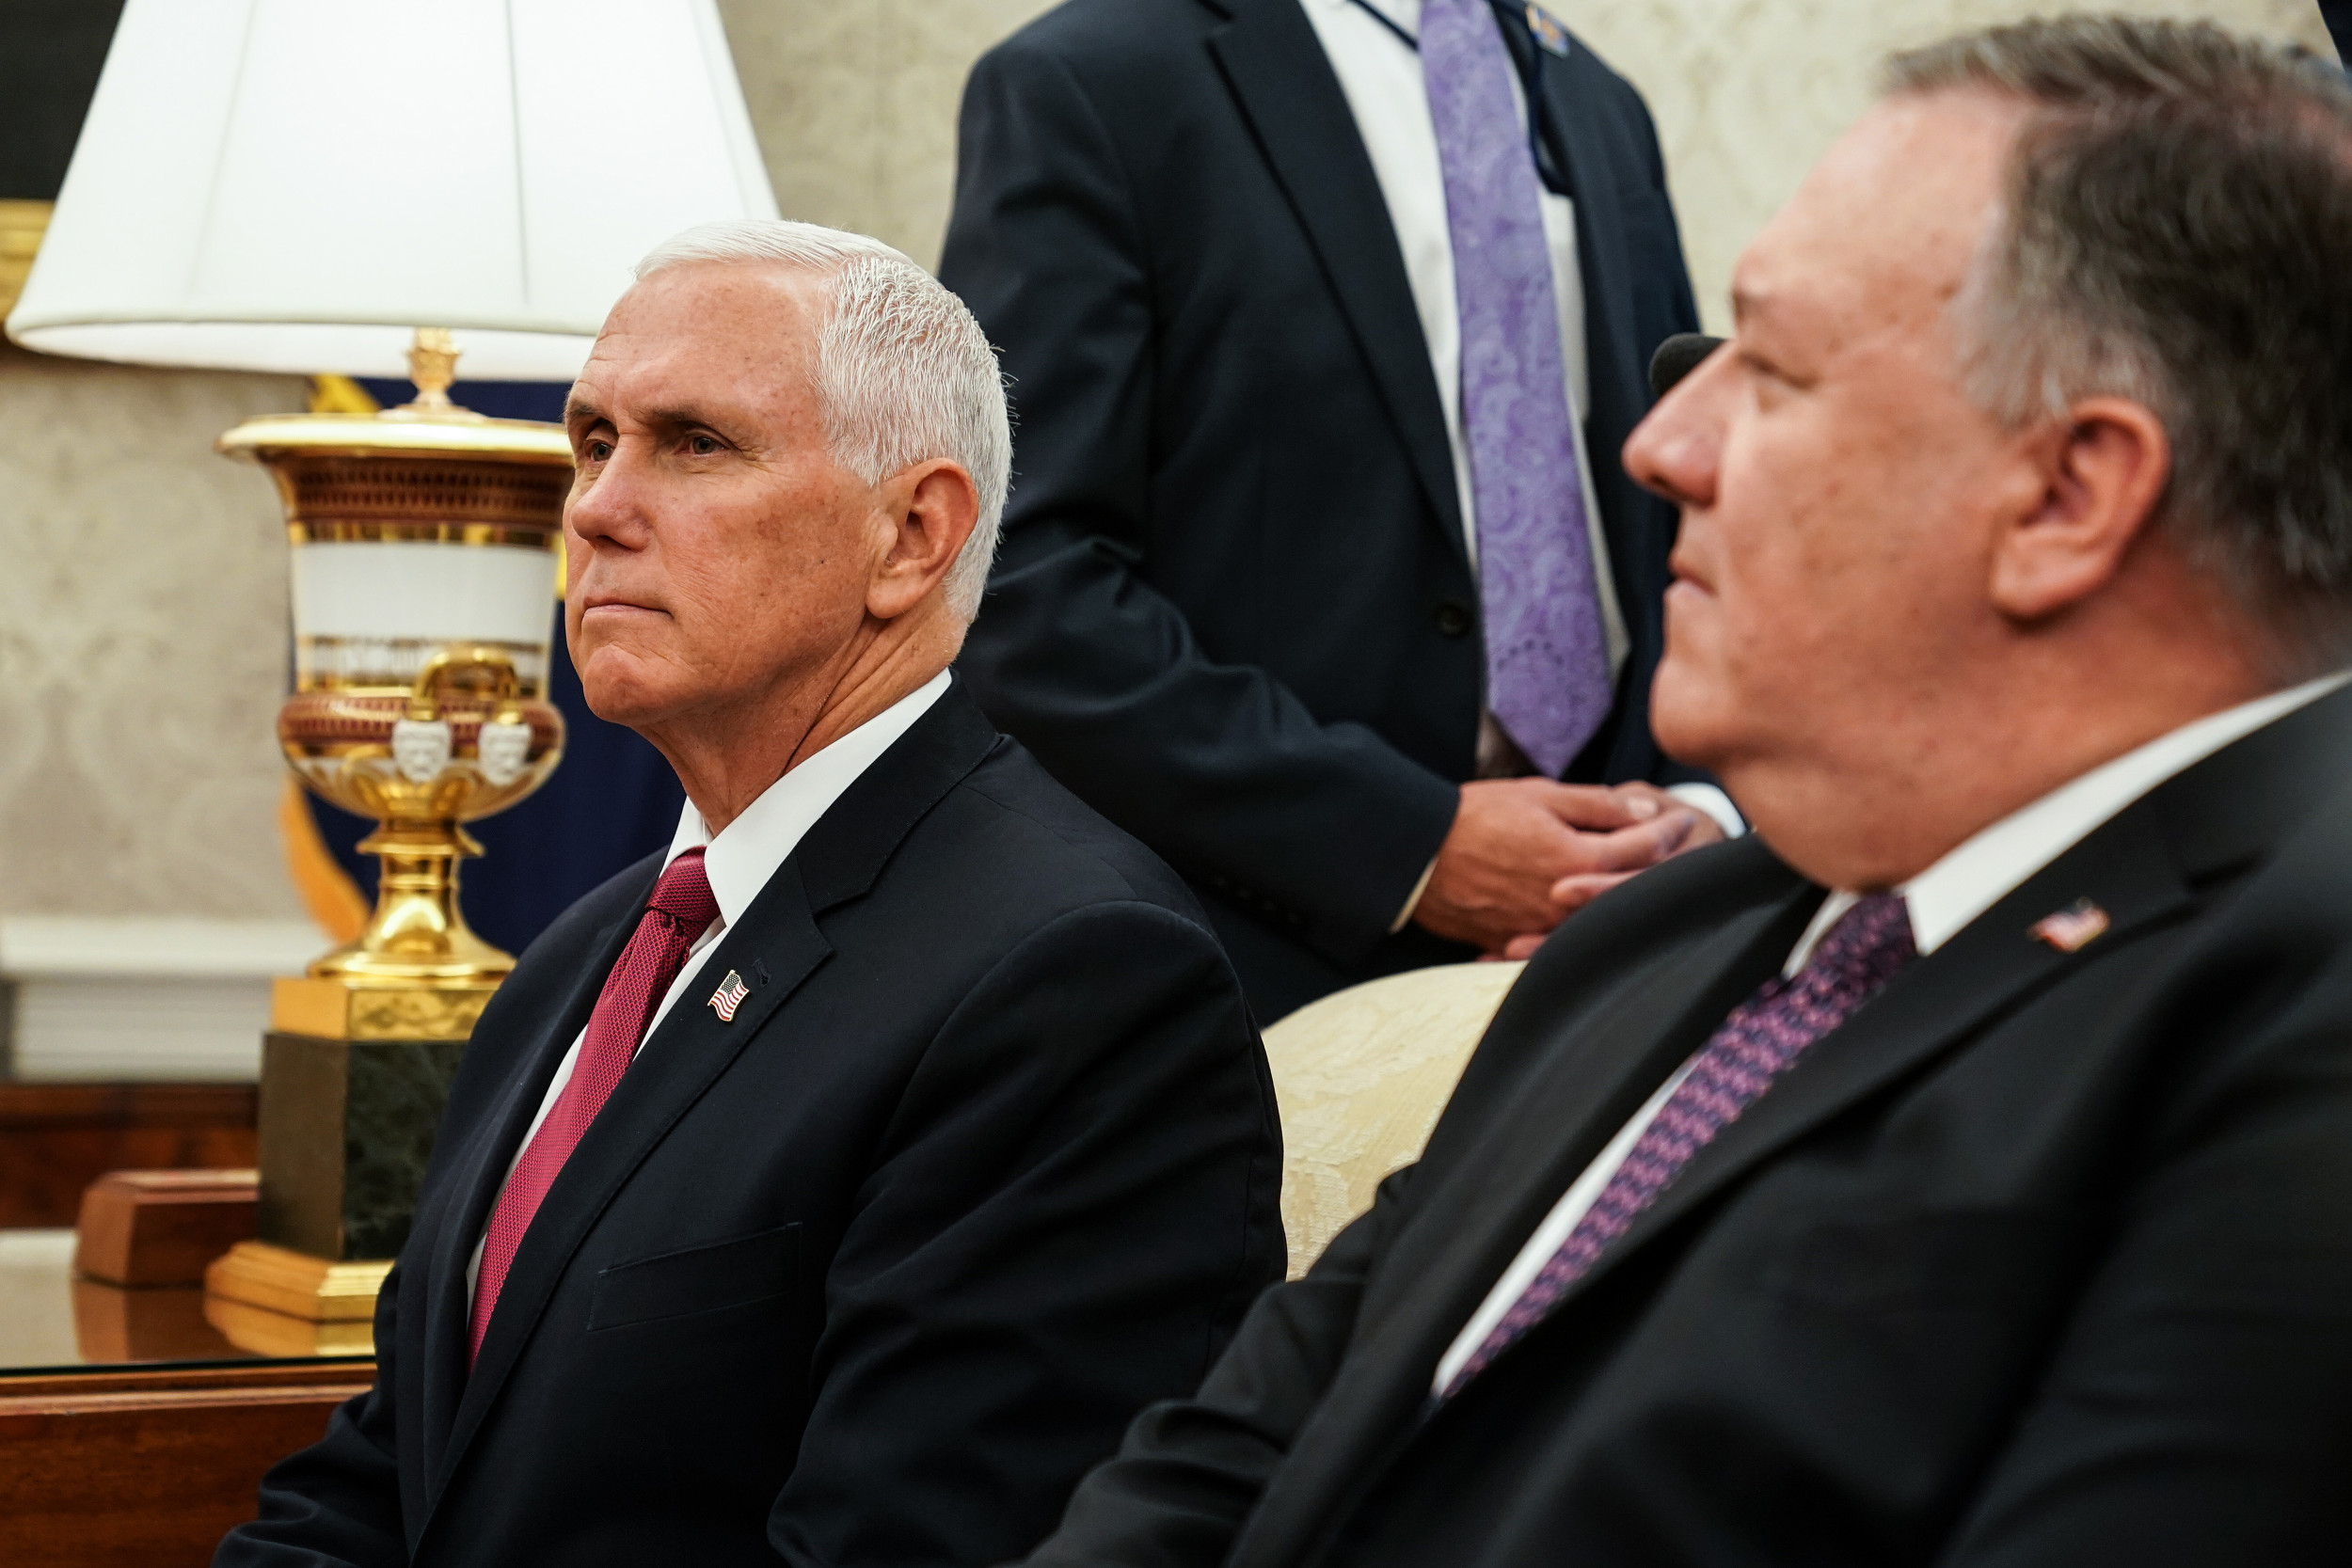 Pompeo, Pence Take Swipes at Trump During Major 2024 GOP Cattle Call Event